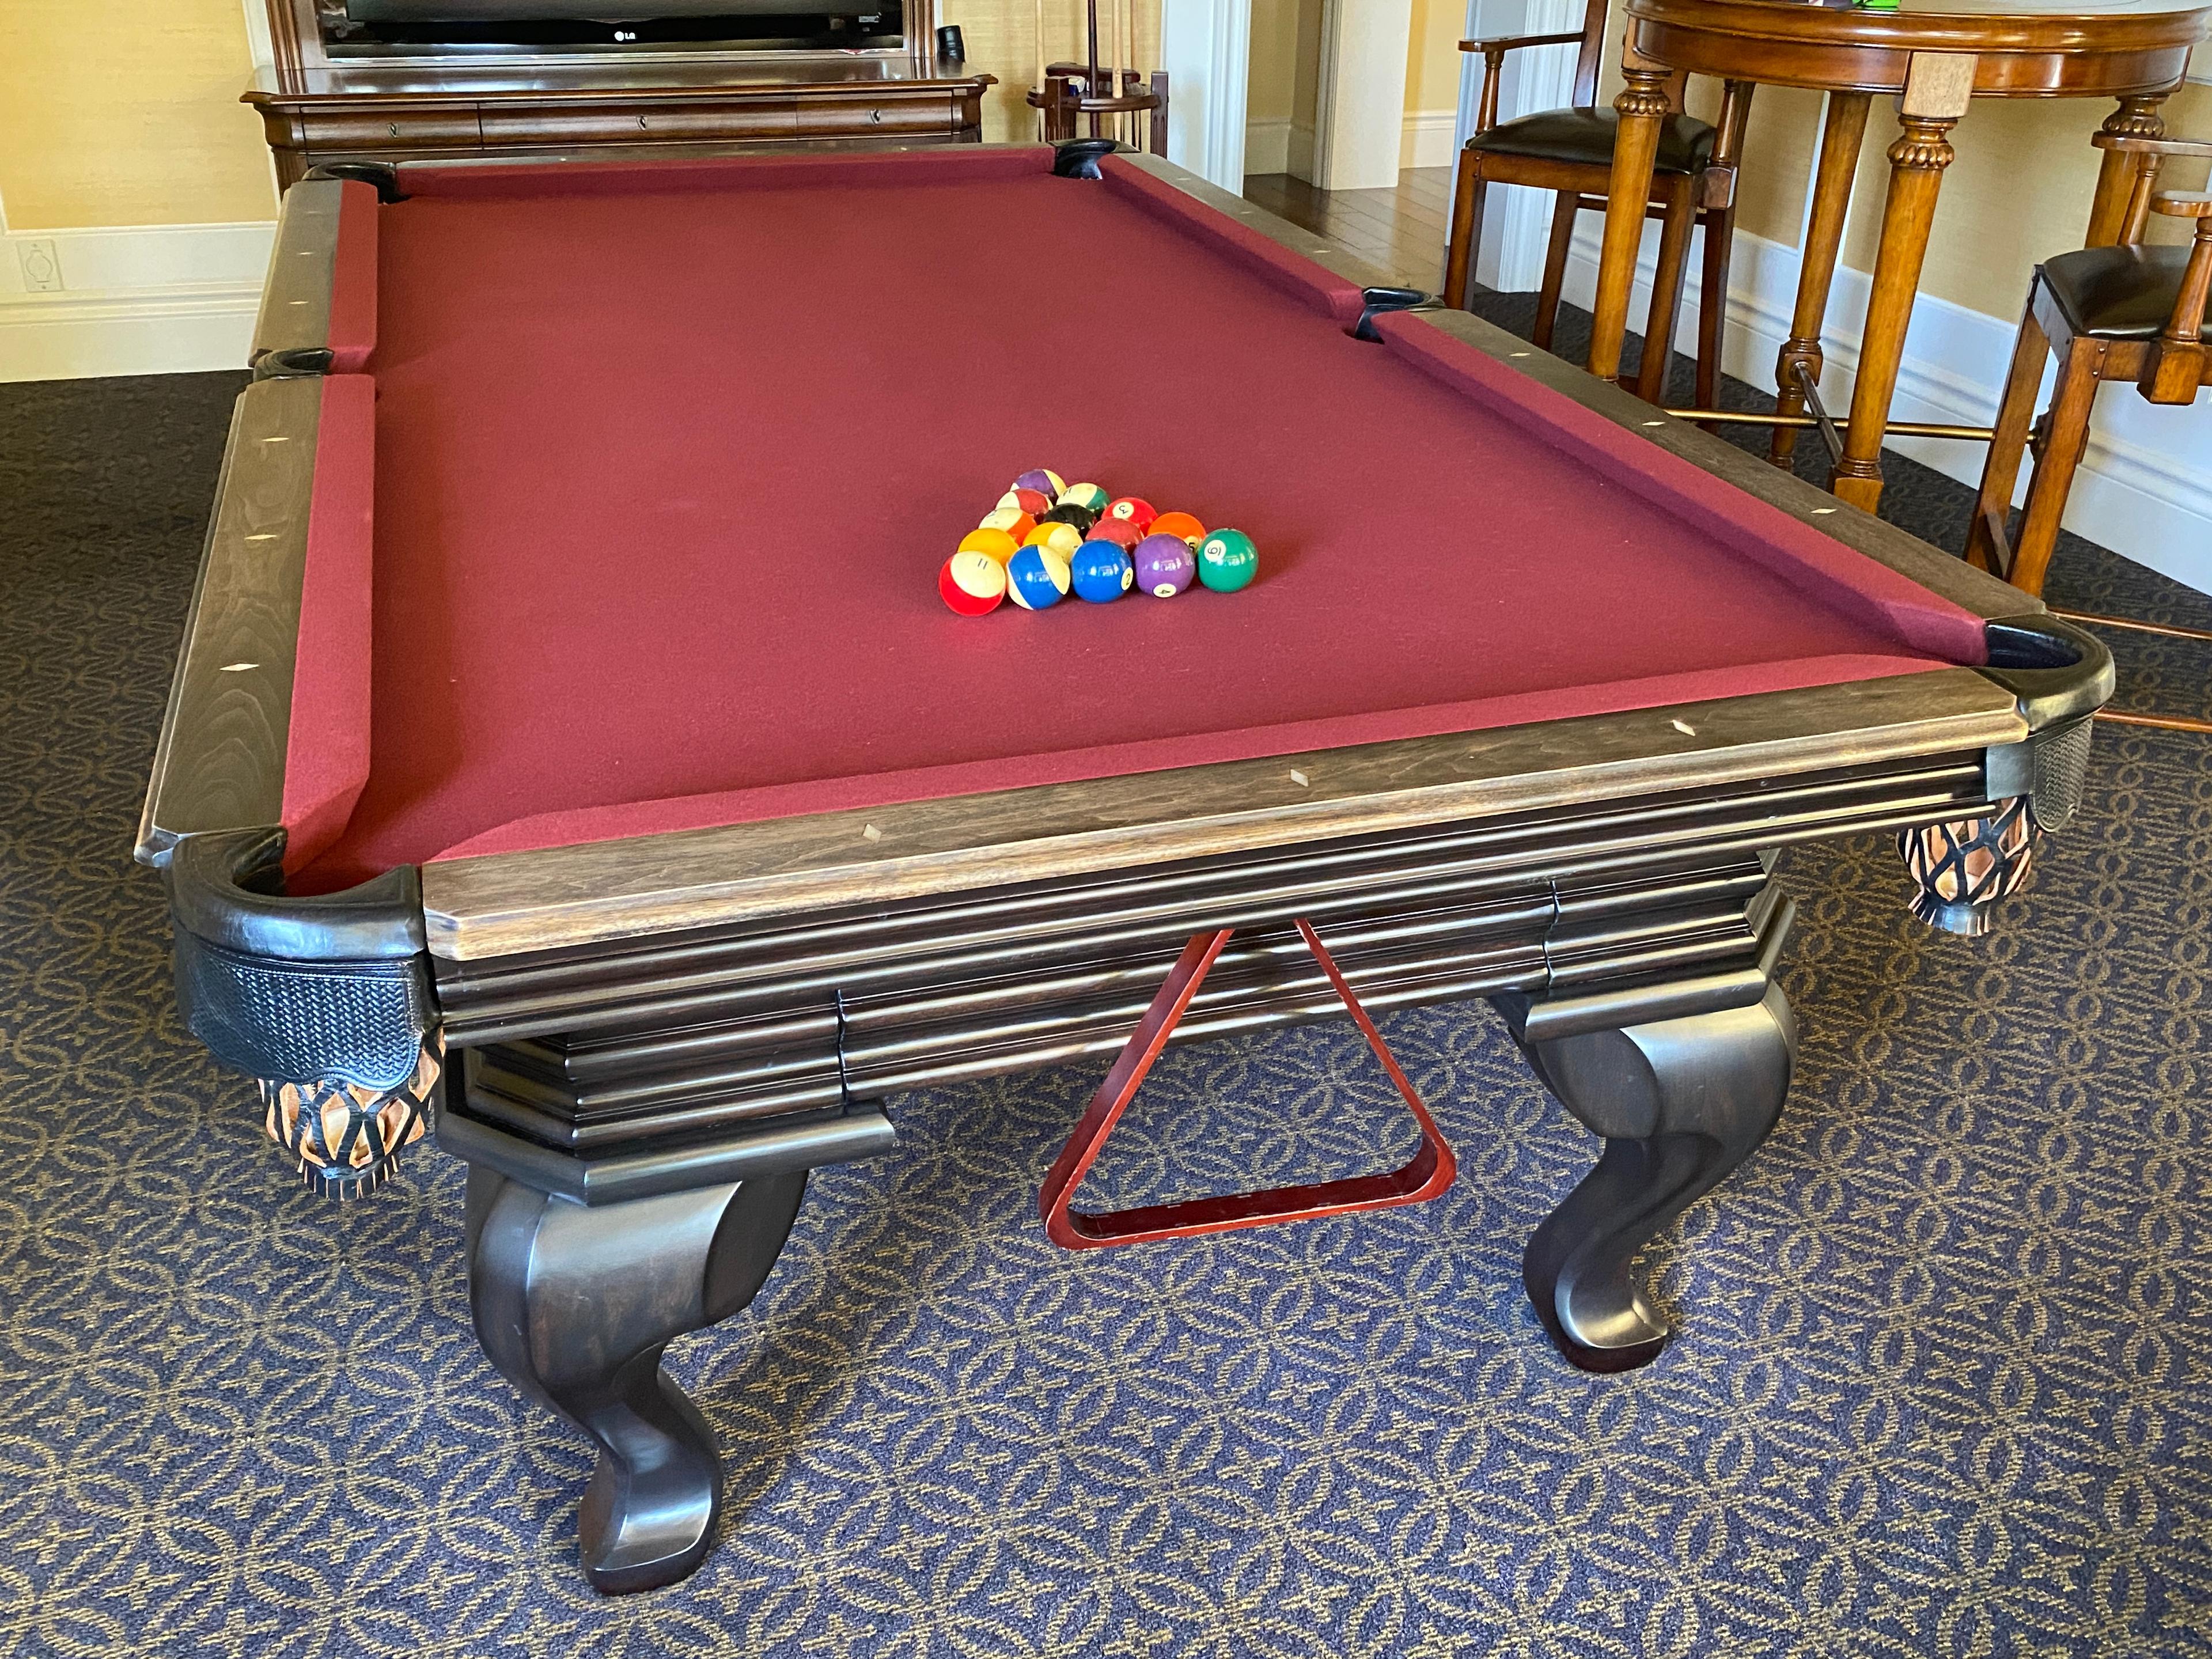 Vitalism Leather Pocket Felted Pool Table With Balls Key Rack And Cues